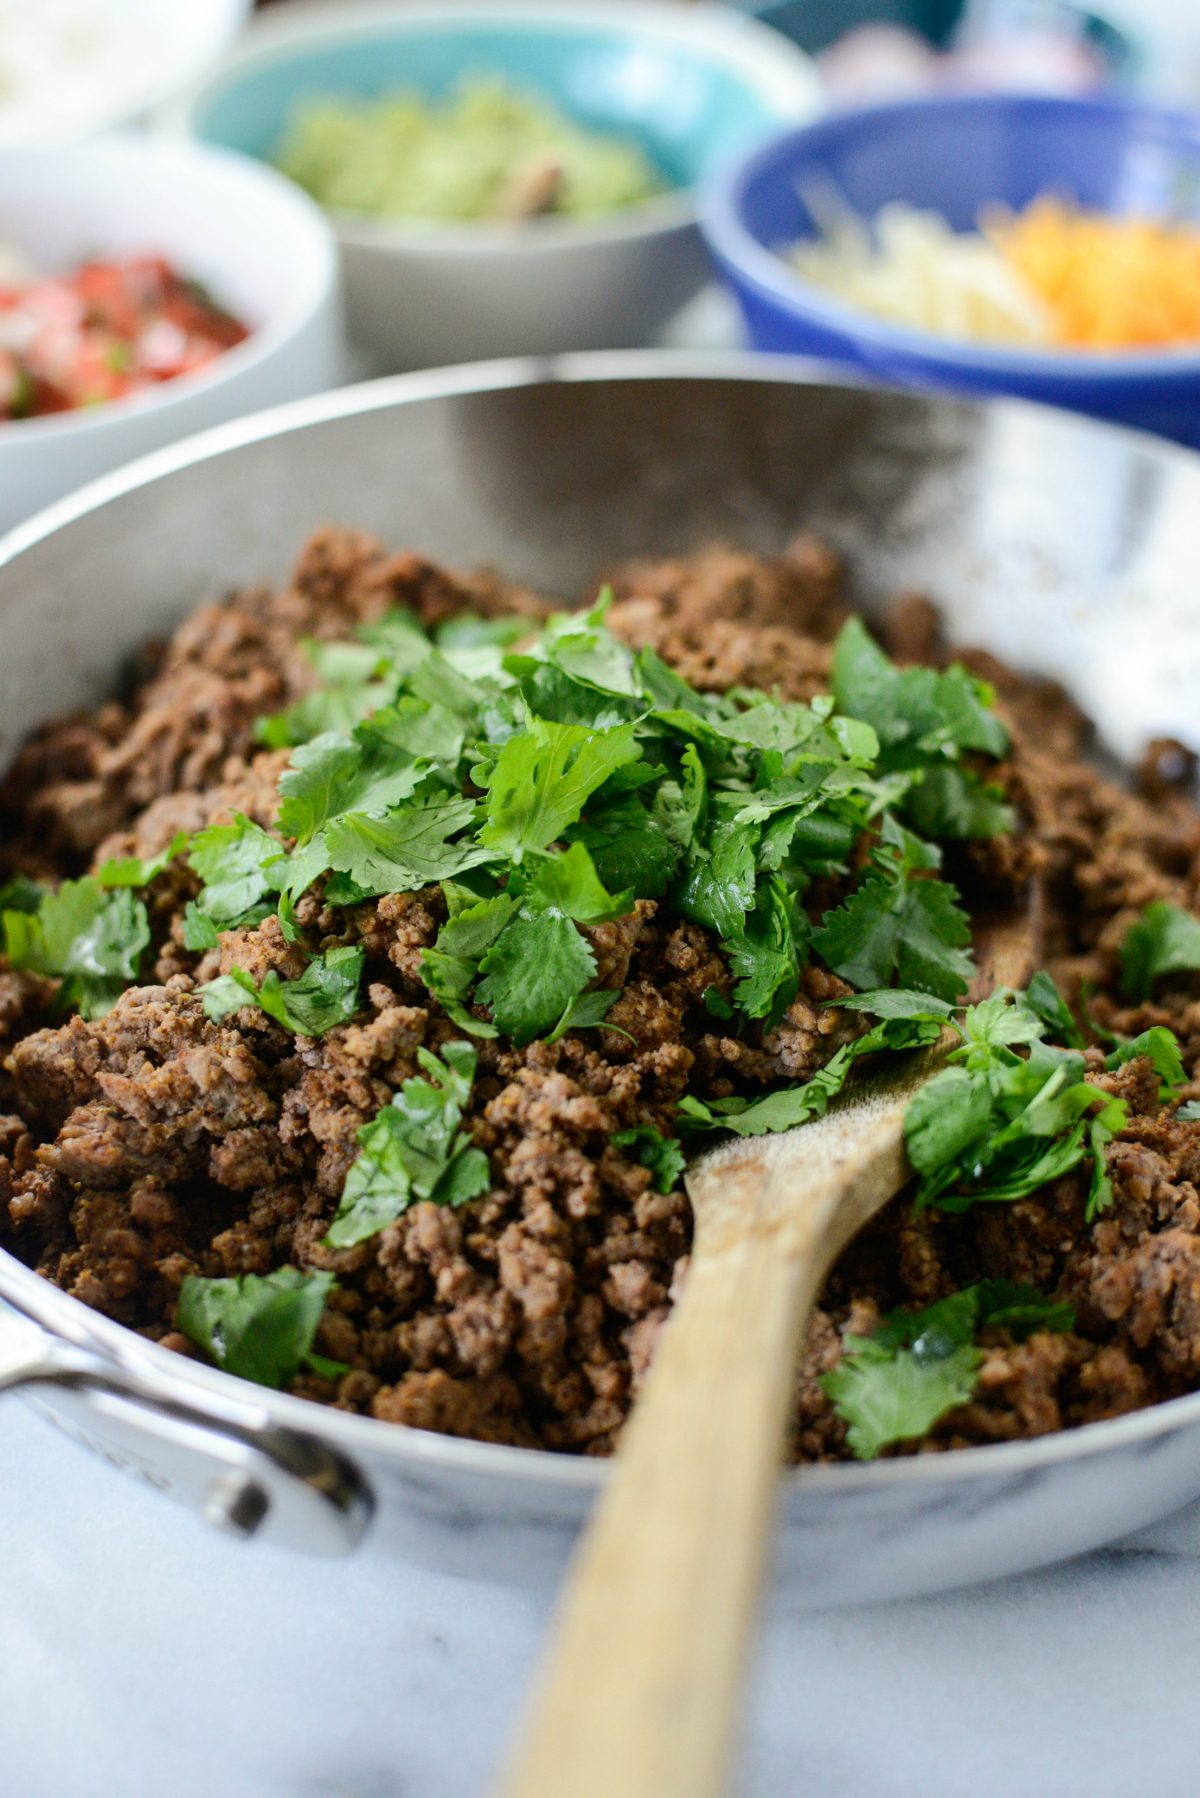 Add cilantro to cooked ground beef.